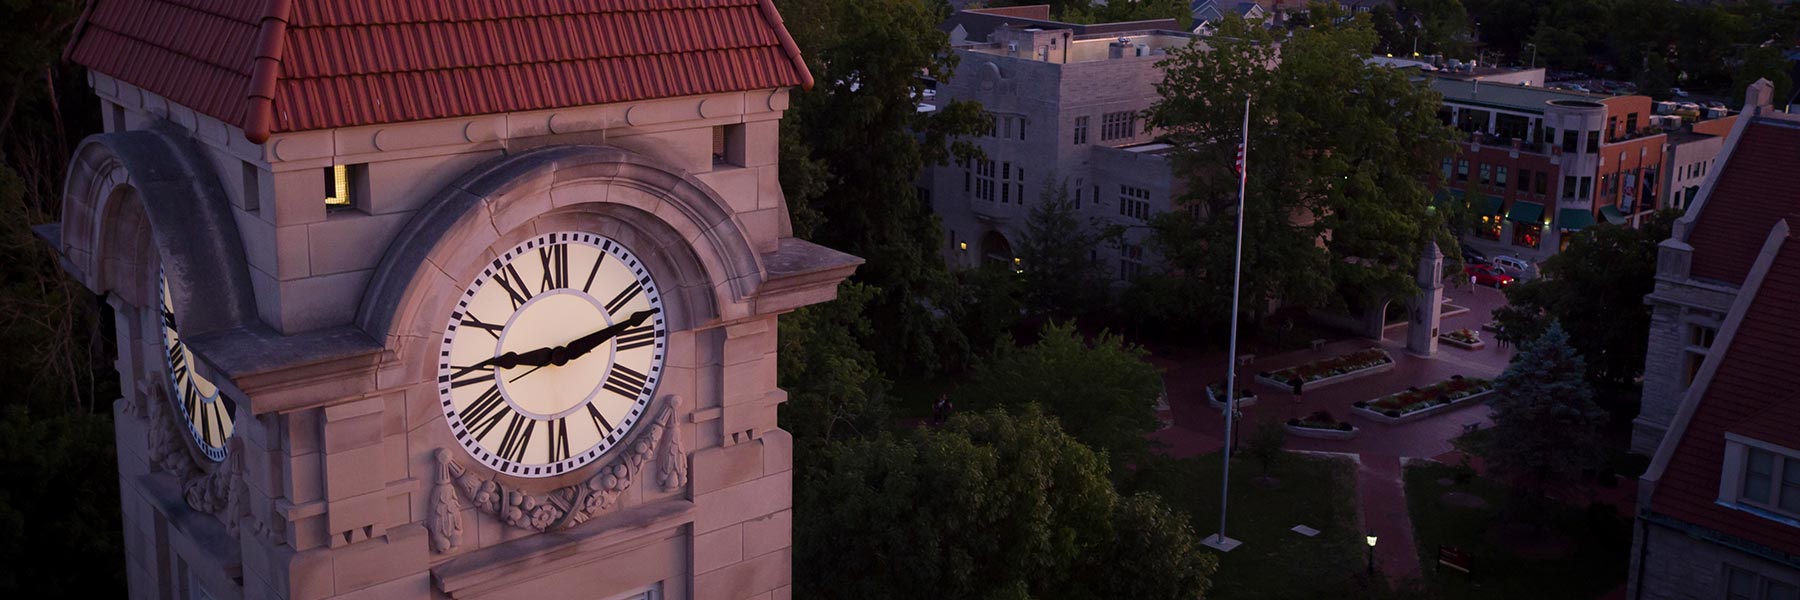 Aerial view of the Student Building clock tower